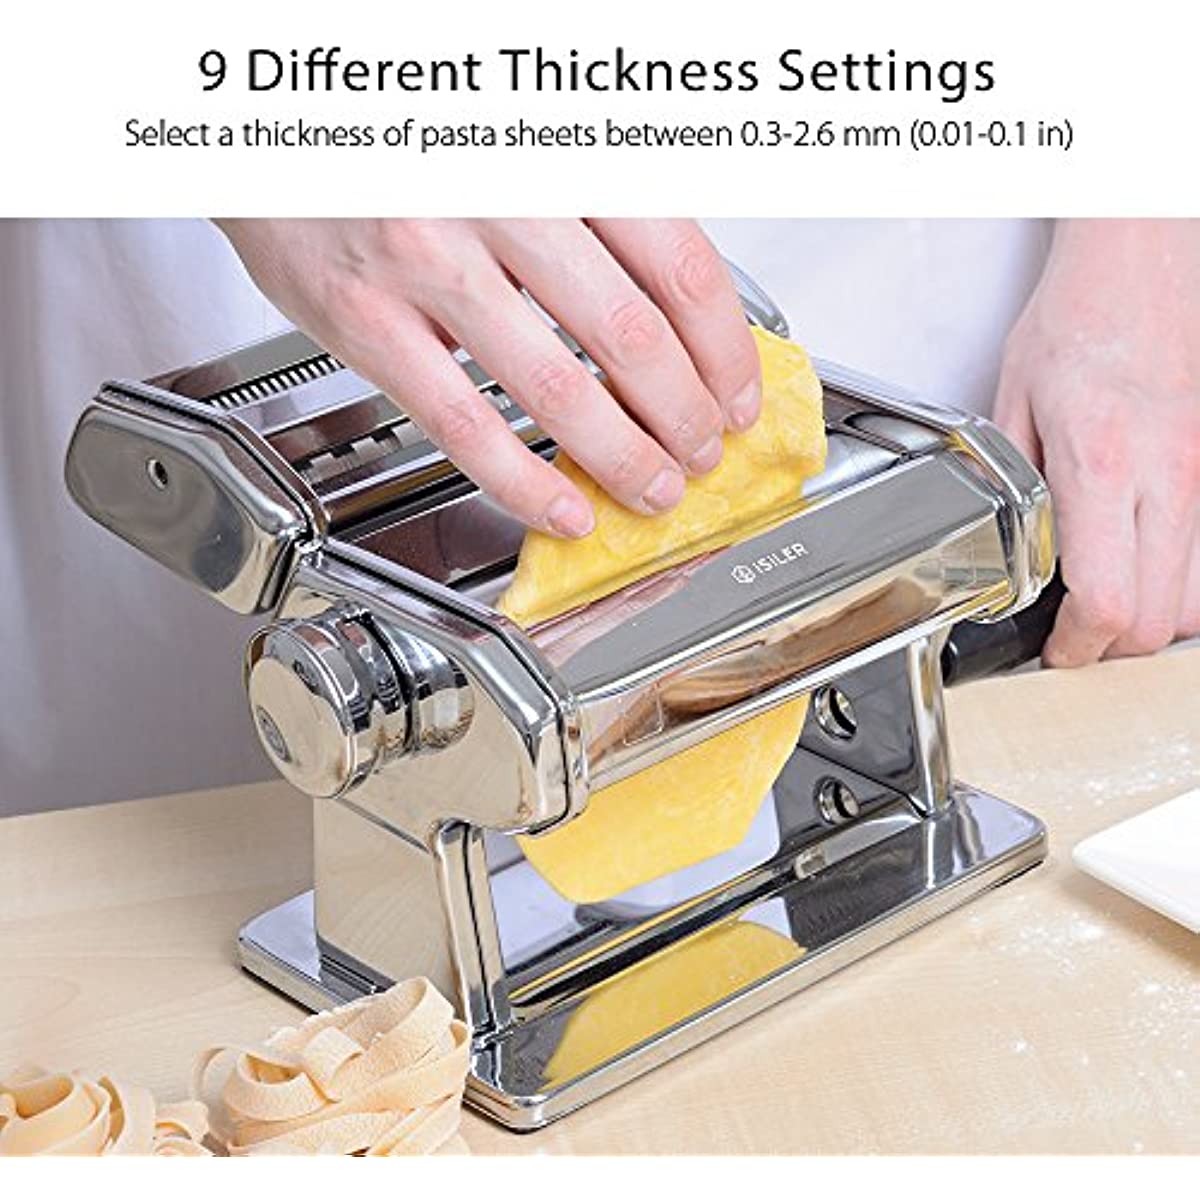 Adjustable Thickness Pasta Machine 150 Roller Noodles Pasta Maker Cutter  Gifts